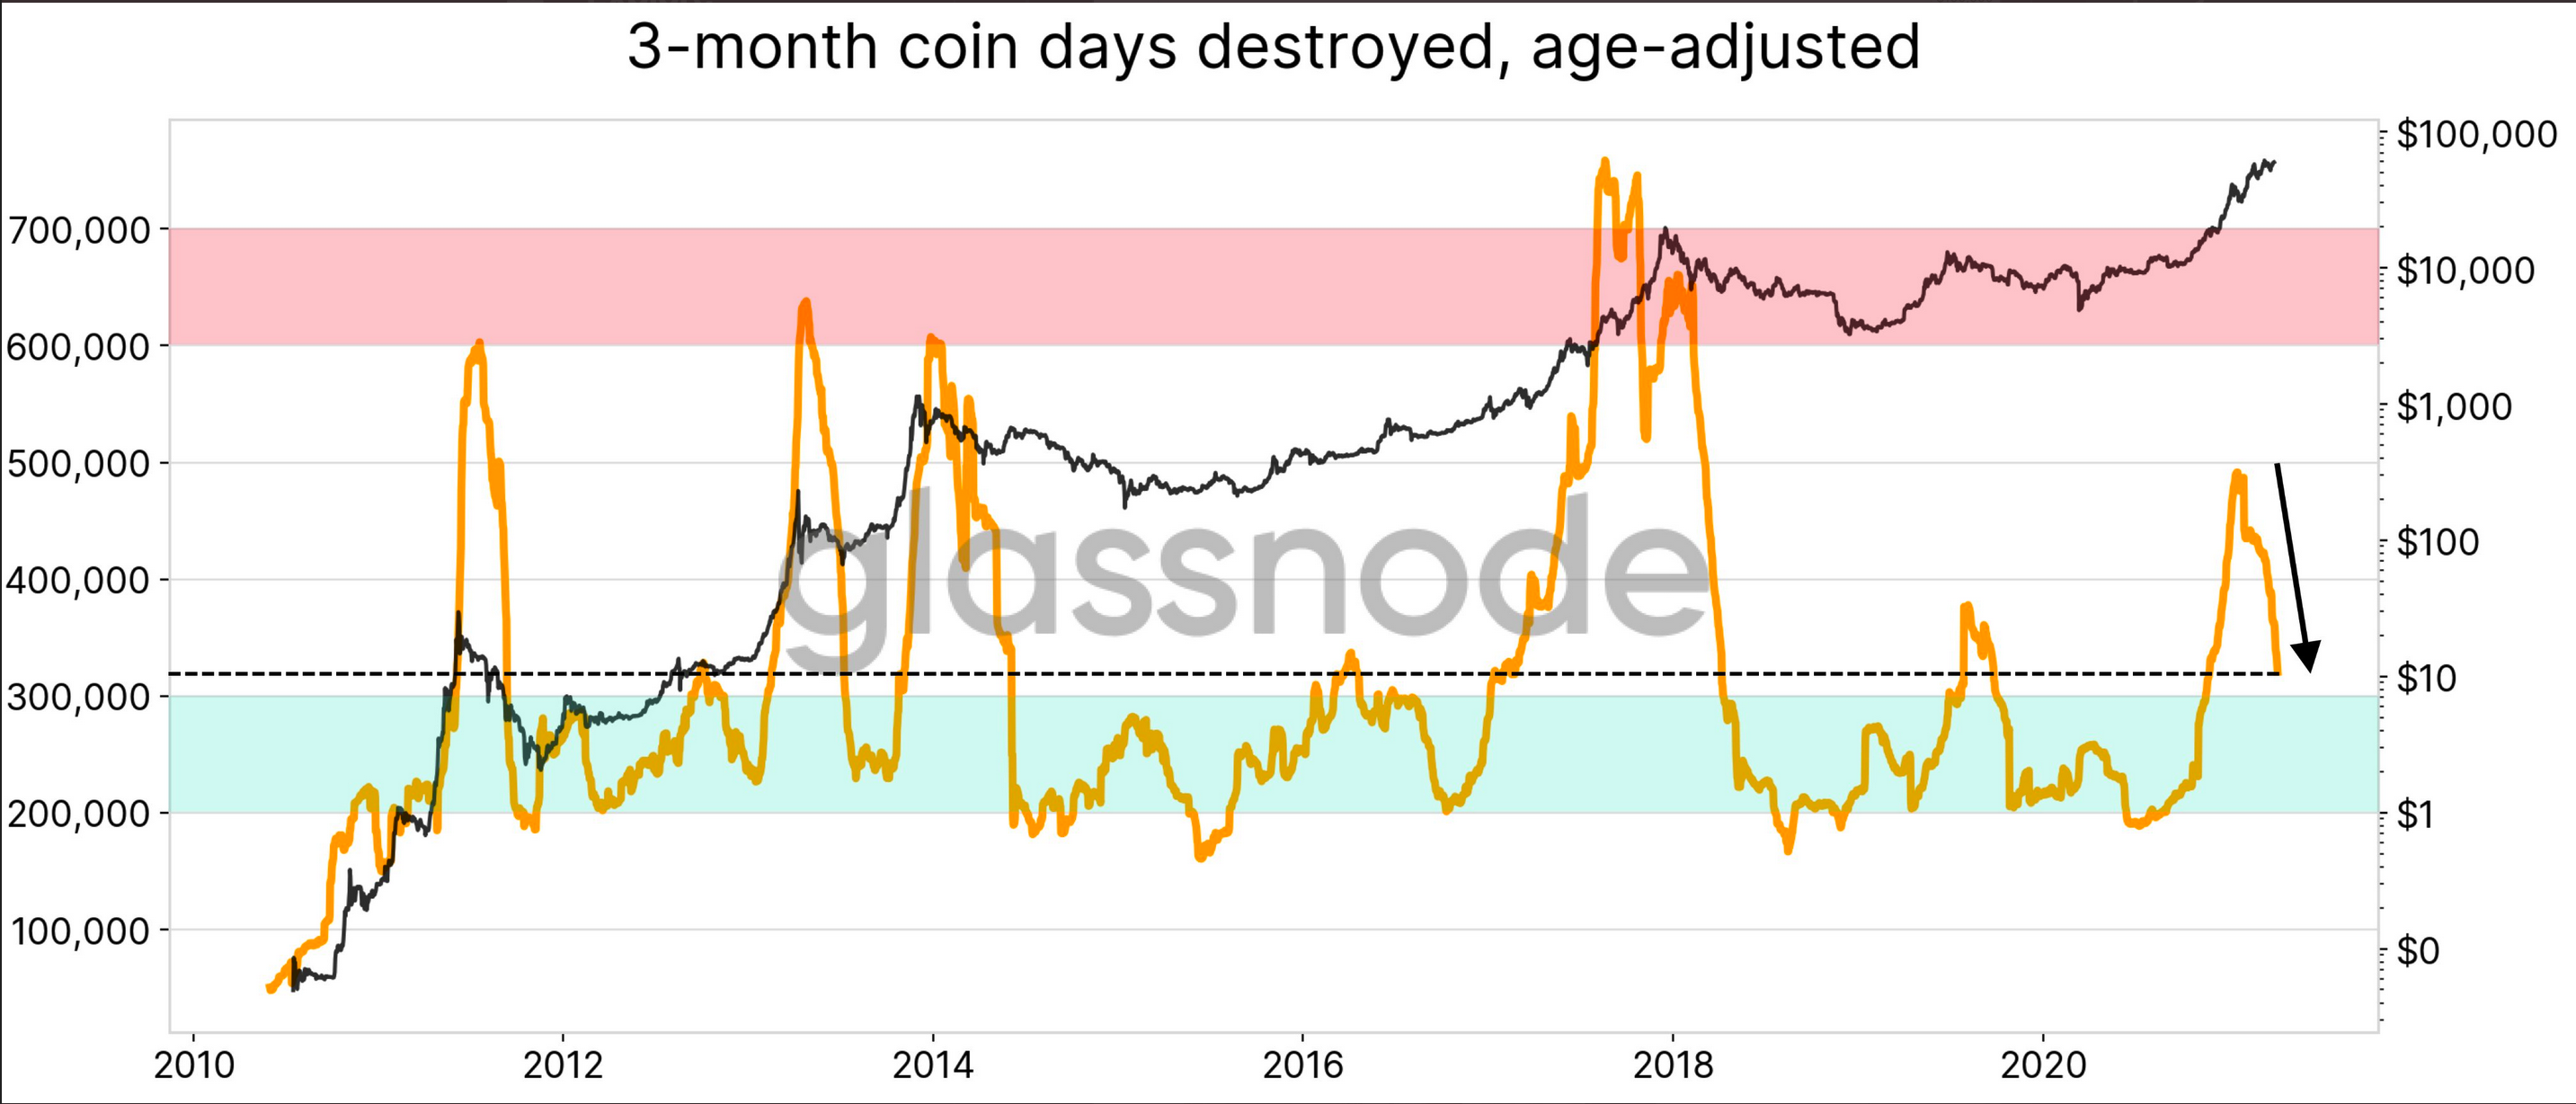 Bitcoin 3 month coin days destroyed